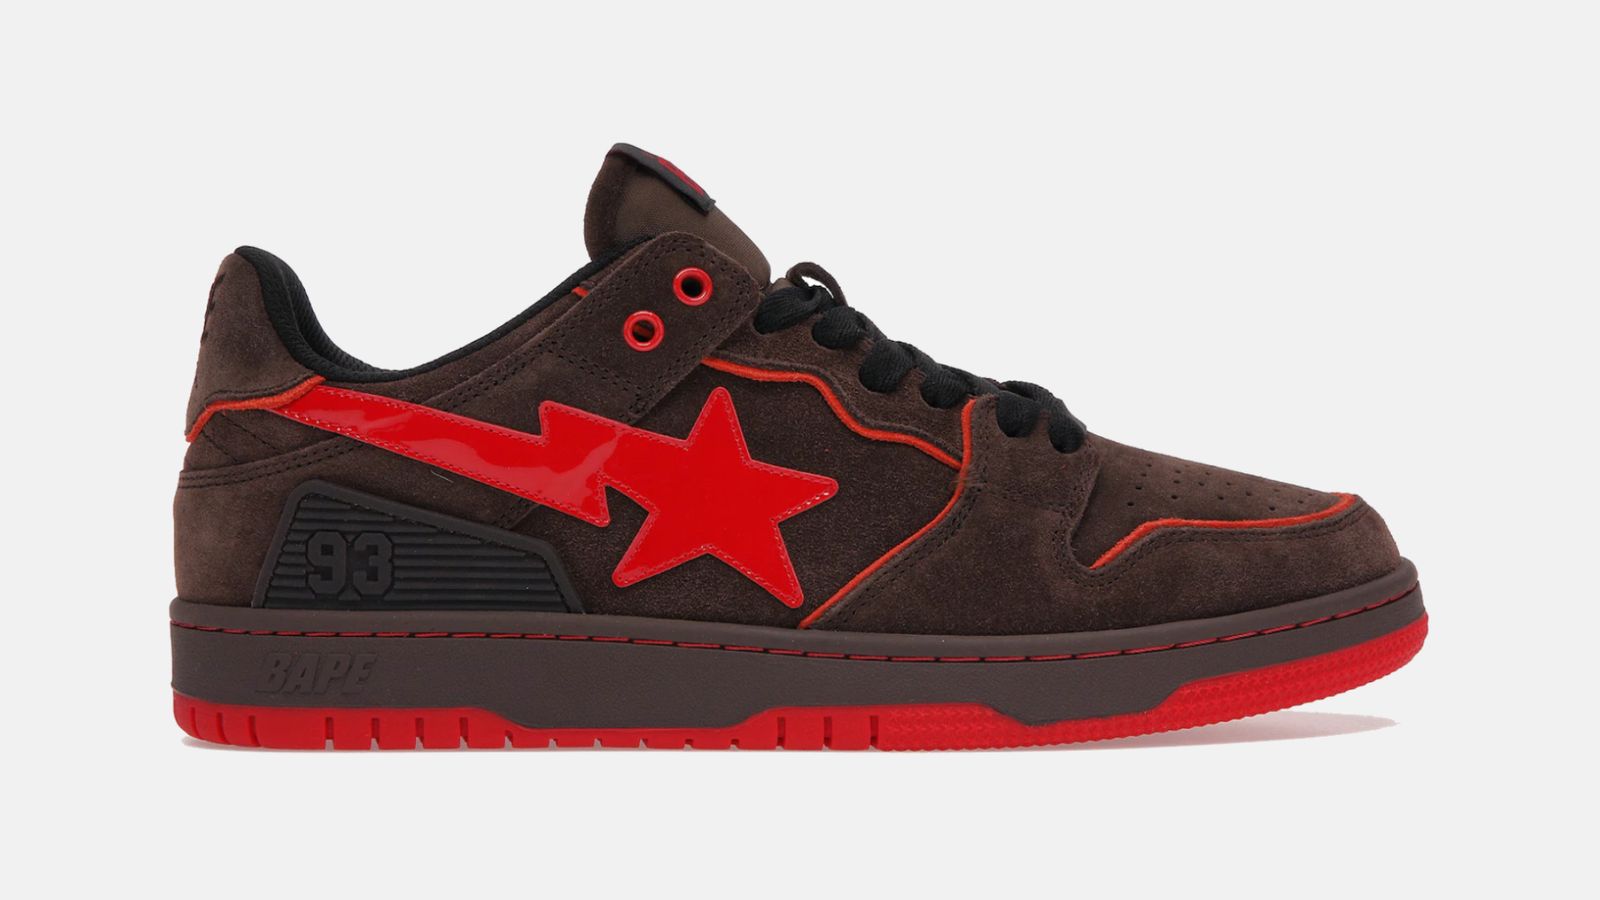 BAPE SK8 Sta product image of a brown suede sneaker with bright red accents.